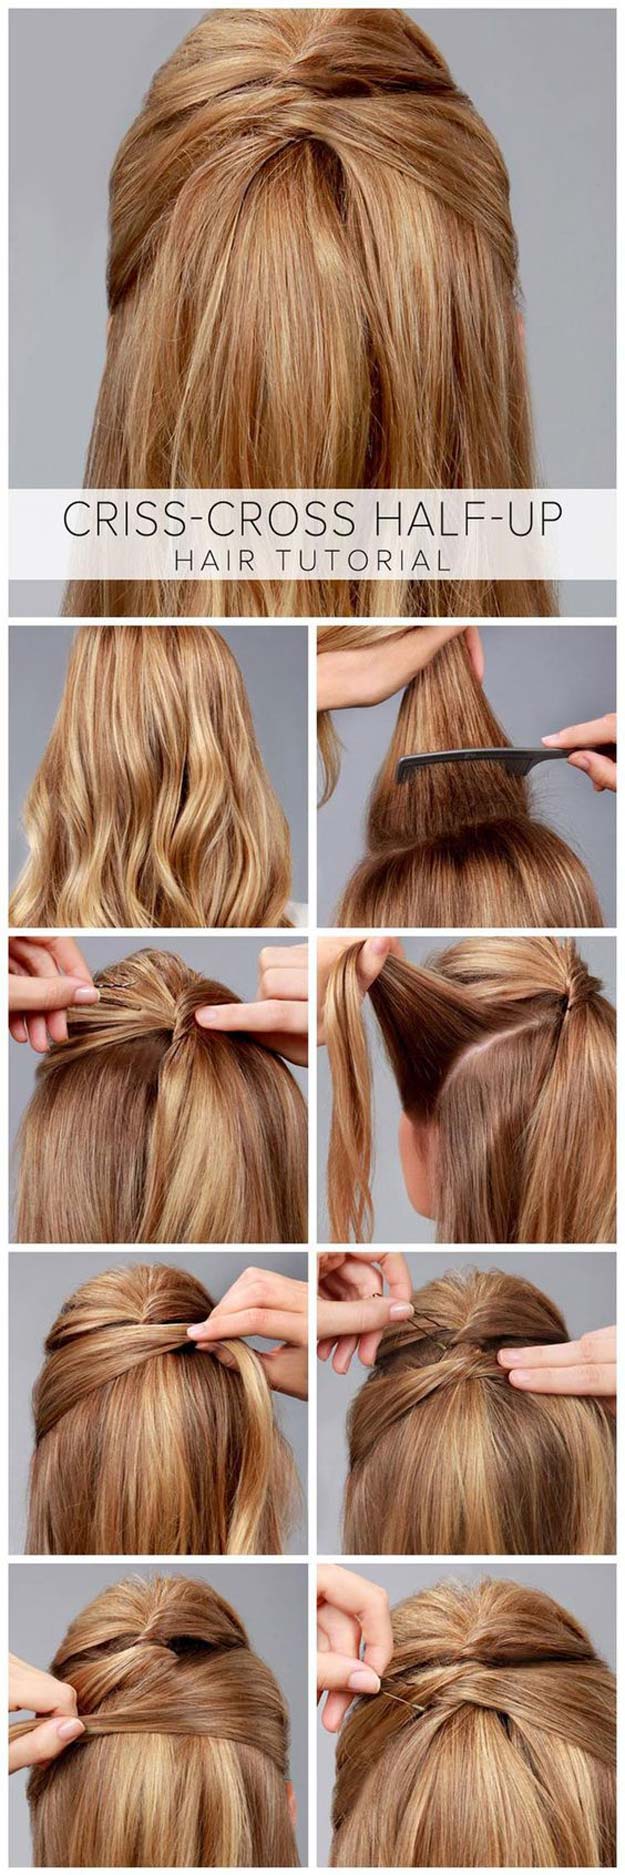 36 Best Hairstyles for Long Hair - DIY Projects for Teens